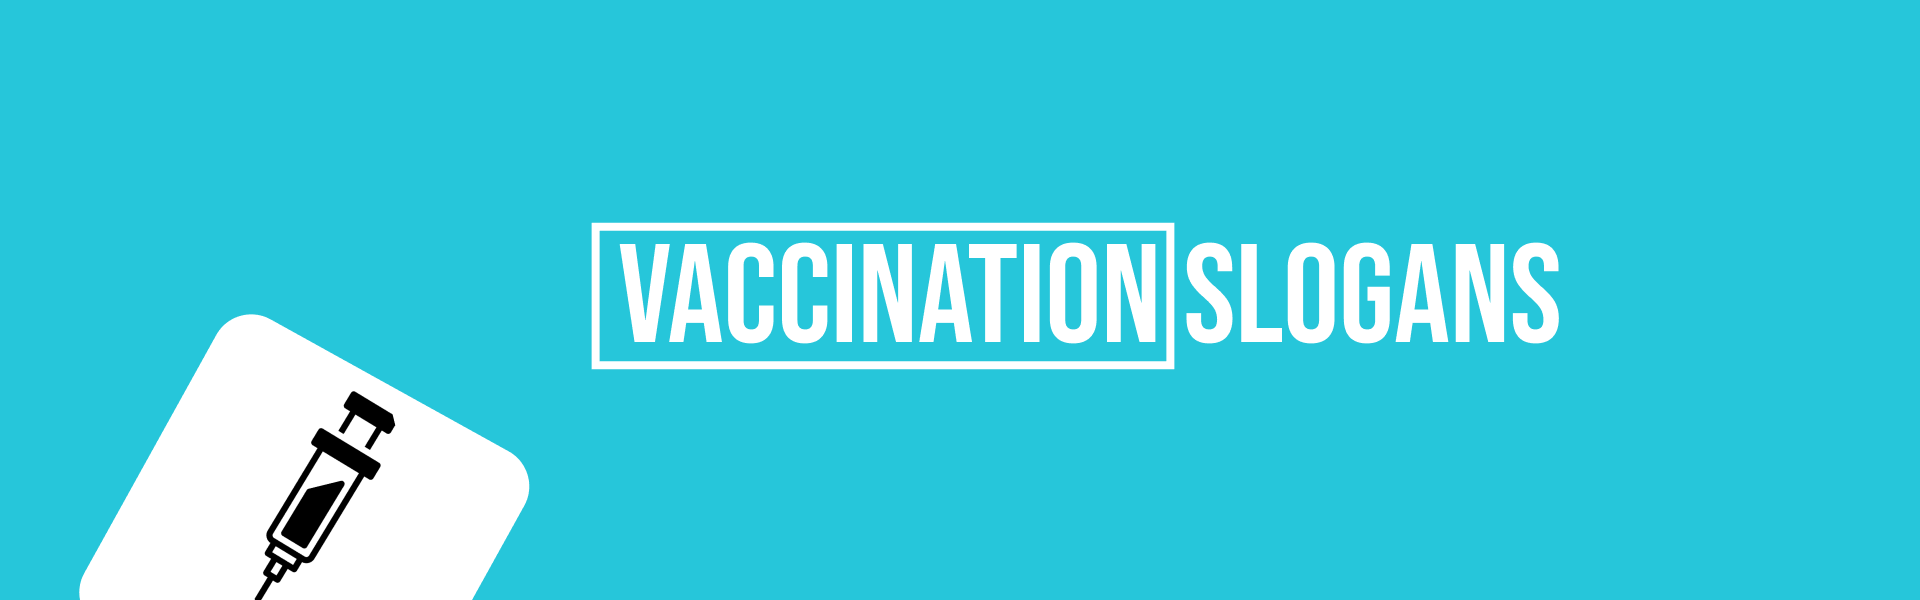 vaccination-slogans-featured